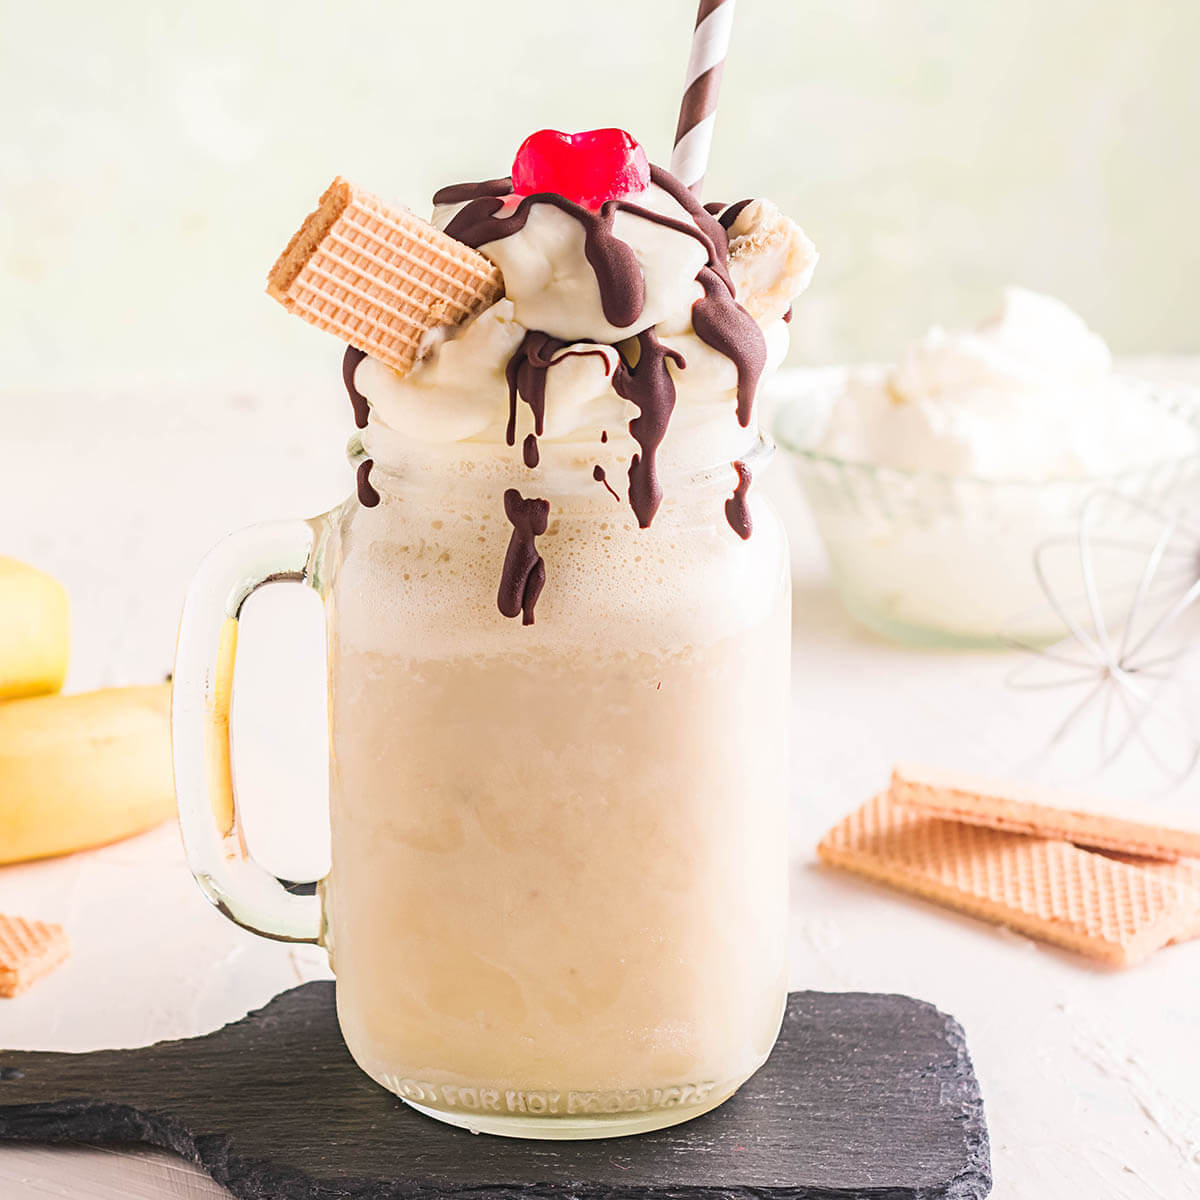 Banana Milkshake with drizzled chocolate, whipped cream and wafers, topped with a cherry.